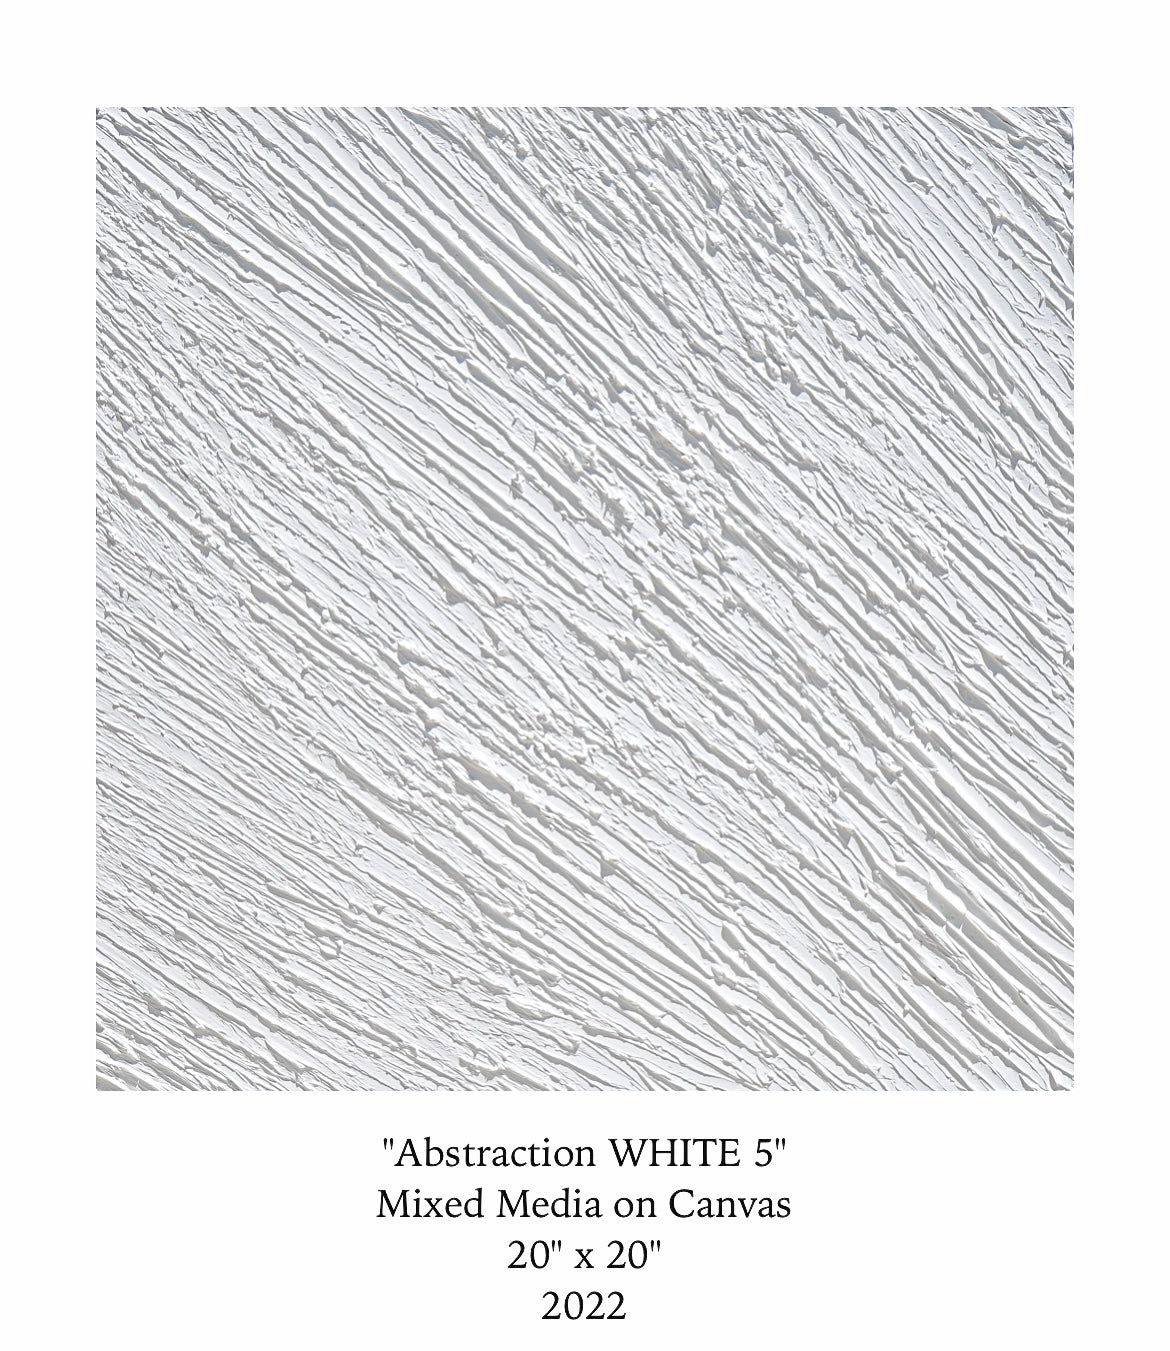 Abstraction WHITE 5